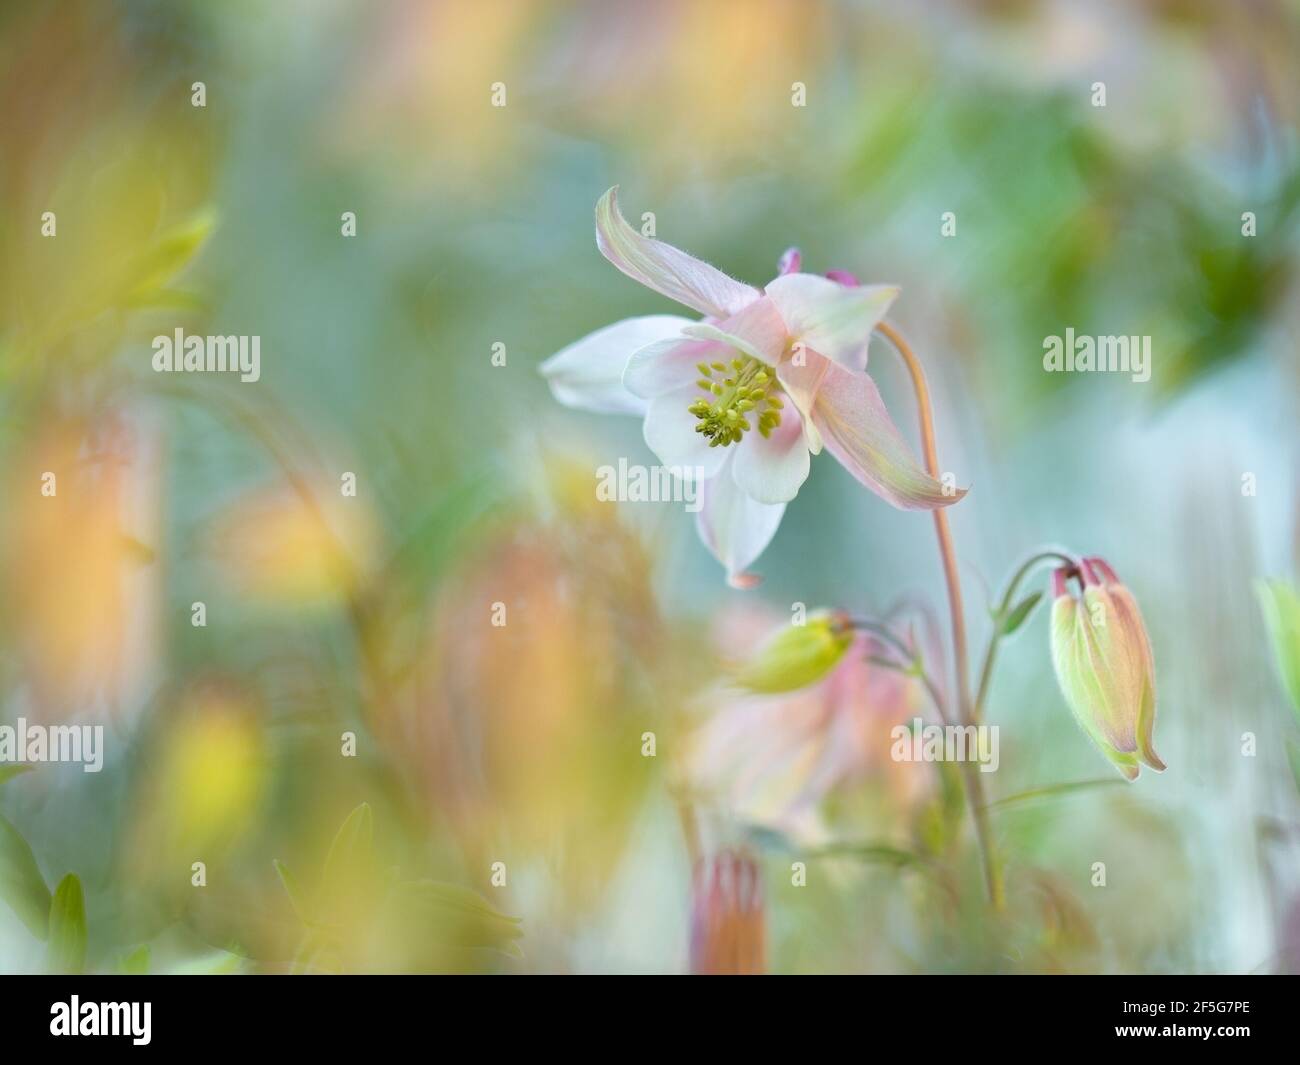 Close up of pink and white aquilegia vulgaris or columbine flower with buds, surrounded by beautiful blurred pastel shades background. Stock Photo